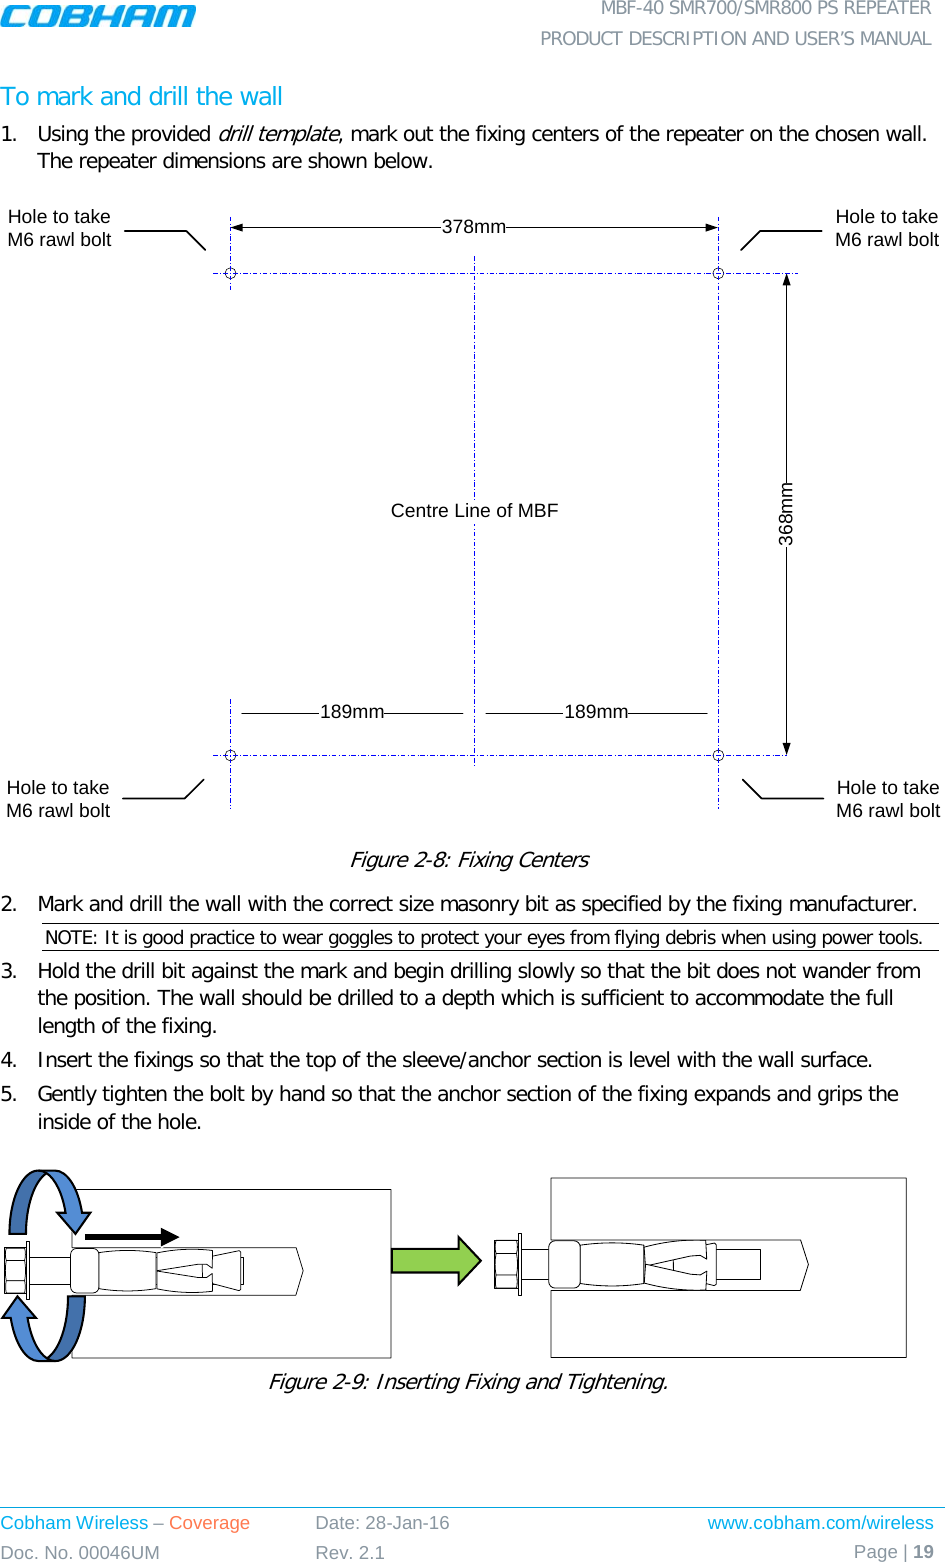  MBF-40 SMR700/SMR800 PS REPEATER PRODUCT DESCRIPTION AND USER’S MANUAL Cobham Wireless – Coverage Date: 28-Jan-16 www.cobham.com/wireless Doc. No. 00046UM Rev. 2.1 Page | 19  To mark and drill the wall 1.  Using the provided drill template, mark out the fixing centers of the repeater on the chosen wall. The repeater dimensions are shown below.  Figure  2-8: Fixing Centers 2.  Mark and drill the wall with the correct size masonry bit as specified by the fixing manufacturer. NOTE: It is good practice to wear goggles to protect your eyes from flying debris when using power tools. 3.  Hold the drill bit against the mark and begin drilling slowly so that the bit does not wander from the position. The wall should be drilled to a depth which is sufficient to accommodate the full length of the fixing. 4.  Insert the fixings so that the top of the sleeve/anchor section is level with the wall surface.  5.  Gently tighten the bolt by hand so that the anchor section of the fixing expands and grips the inside of the hole.                   Figure  2-9: Inserting Fixing and Tightening. 368mm378mmHole to take M6 rawl boltHole to take M6 rawl bolt189mm 189mmCentre Line of MBFHole to take M6 rawl boltHole to take M6 rawl bolt